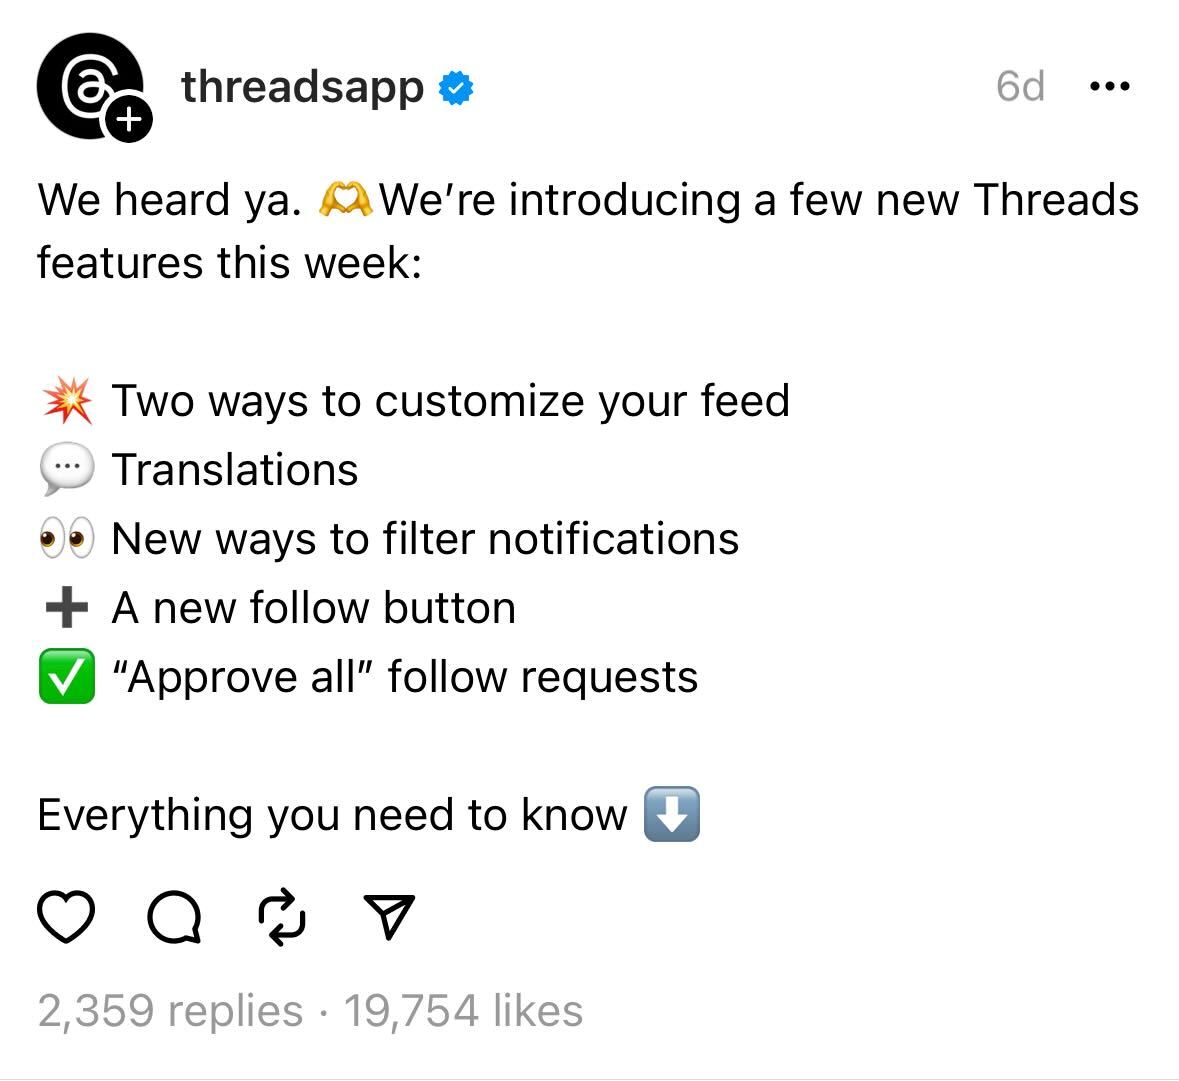 A screenshot of a Thread post from the Threads account (@threadsapp). The post says, “We heard ya. We’re introducing a few new Threads features this week: Two ways to customize your feed, translations, new ways to filter notifications, a new follow button, “approve all” follow requests”.